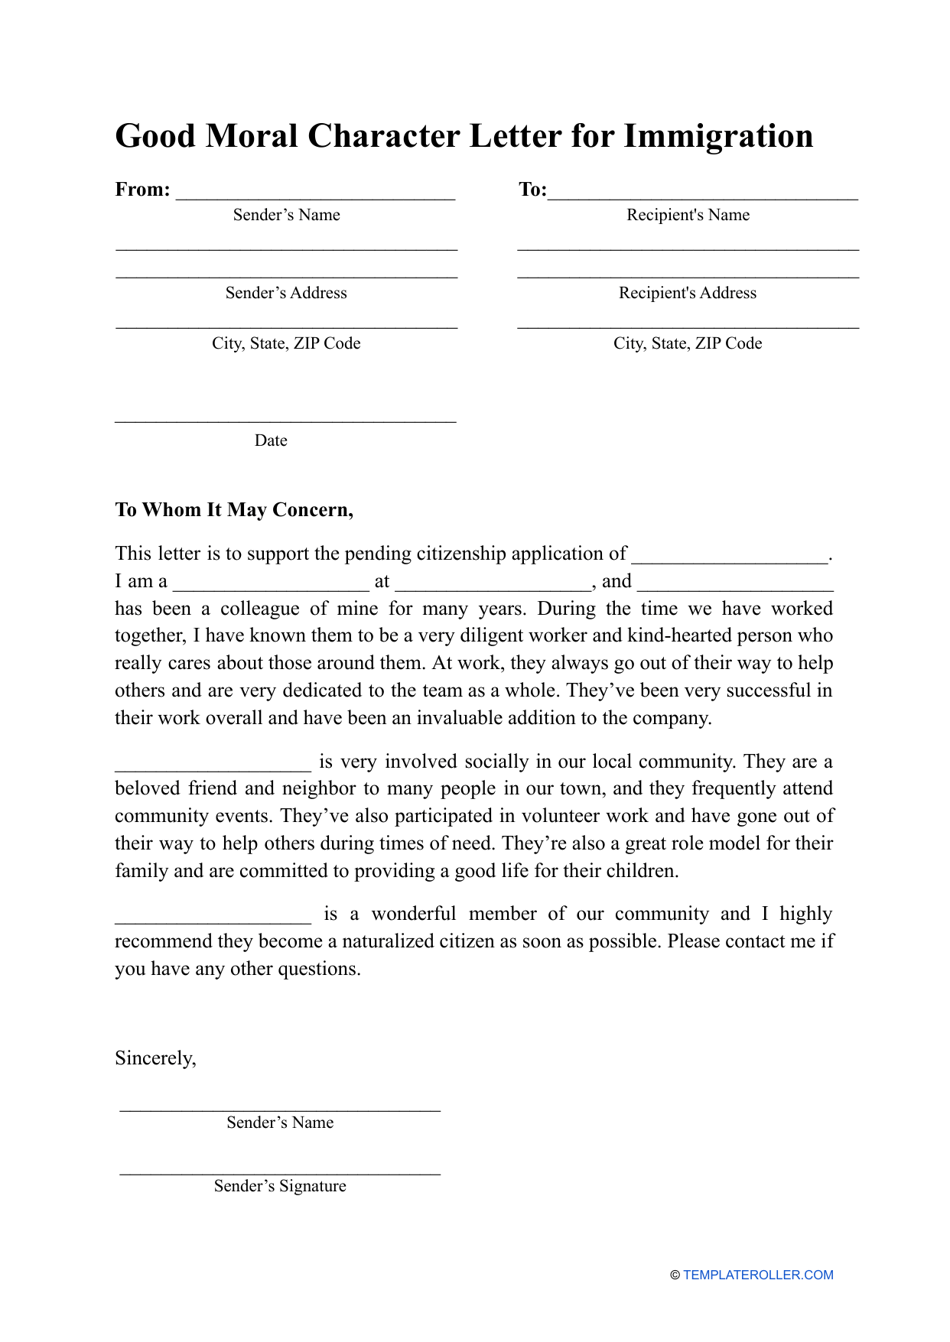 Good Moral Character Letter for Immigration Template Download Printable